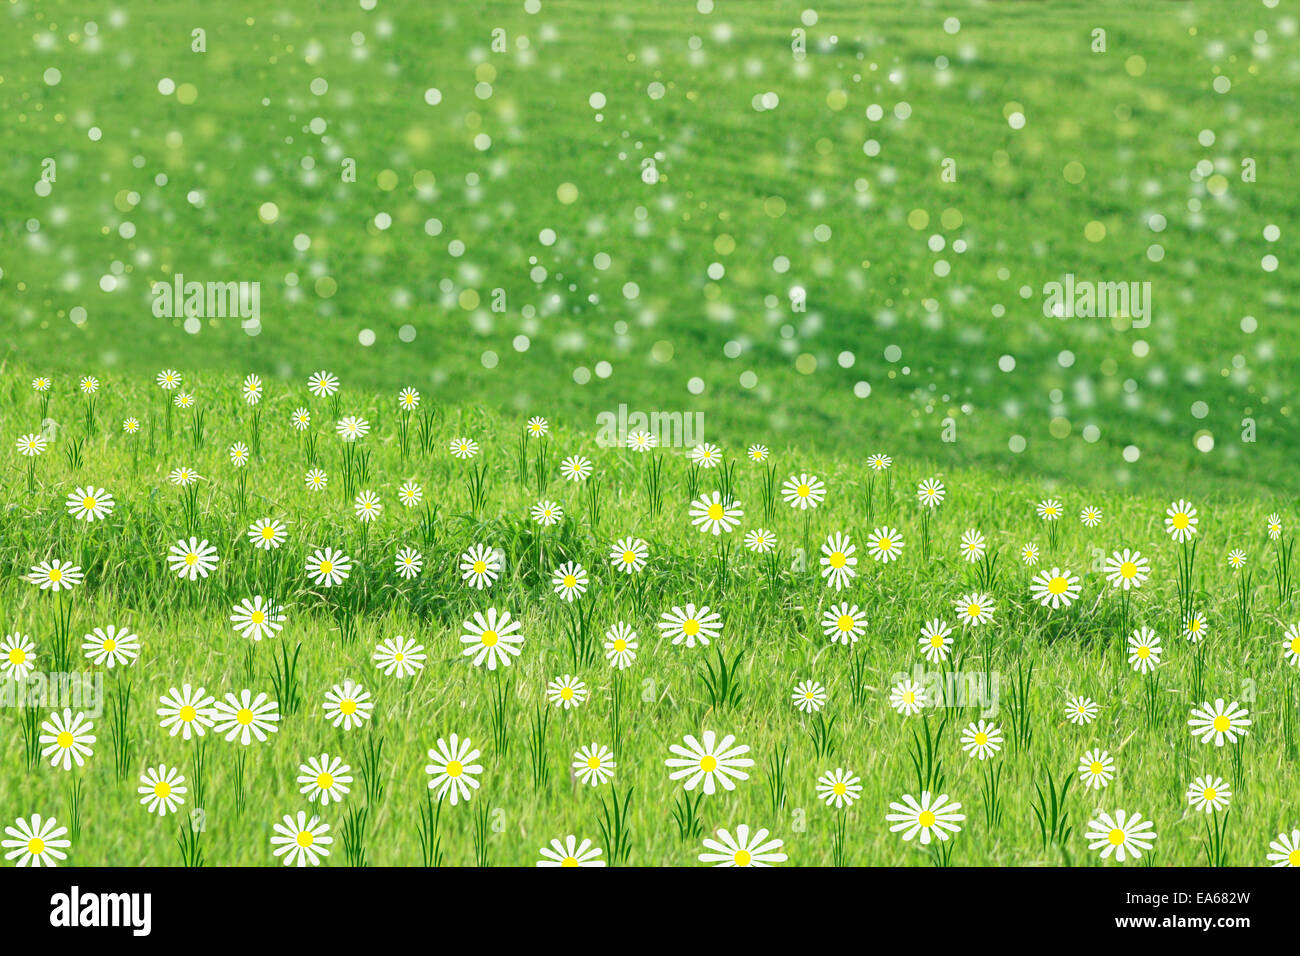 Green spring meadow background Banque D'Images